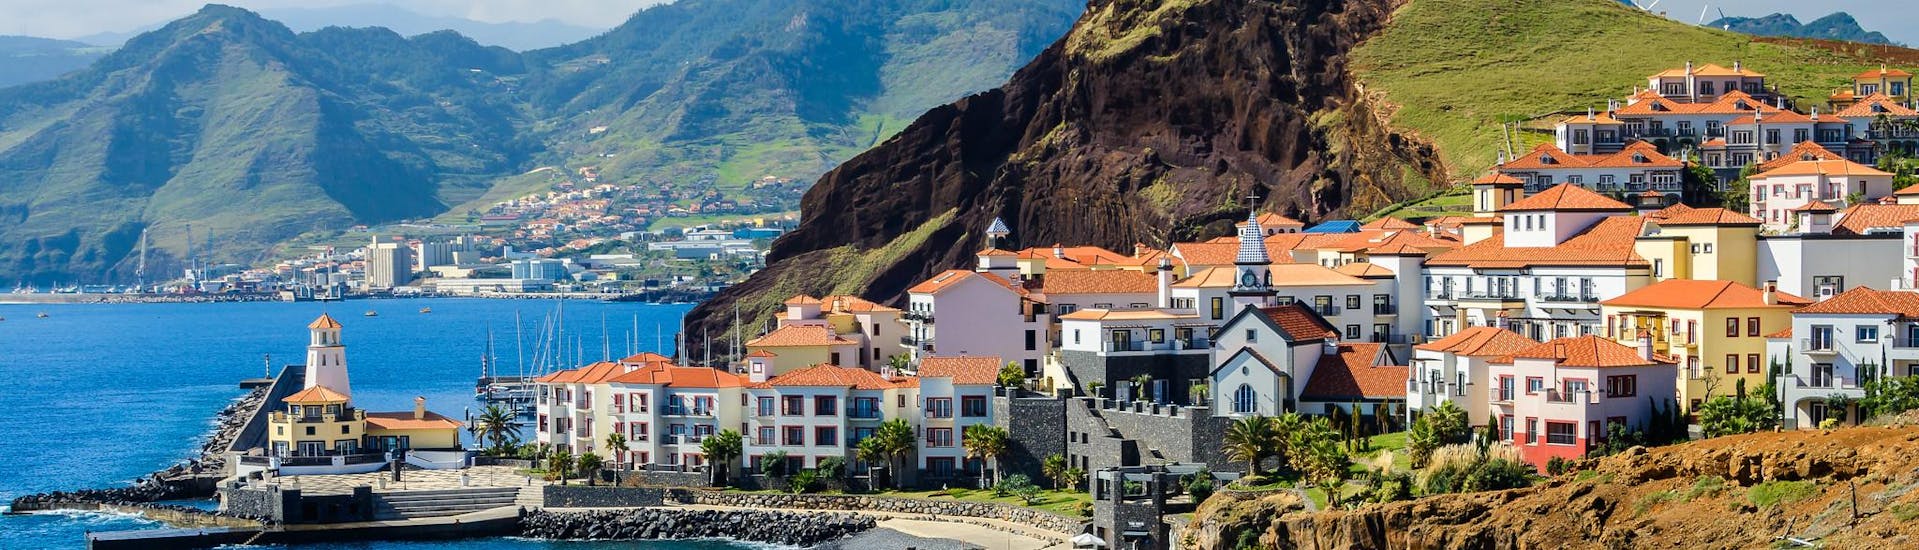 View over a village in Madeira, a wonderful island that you can discover with a boat trip.